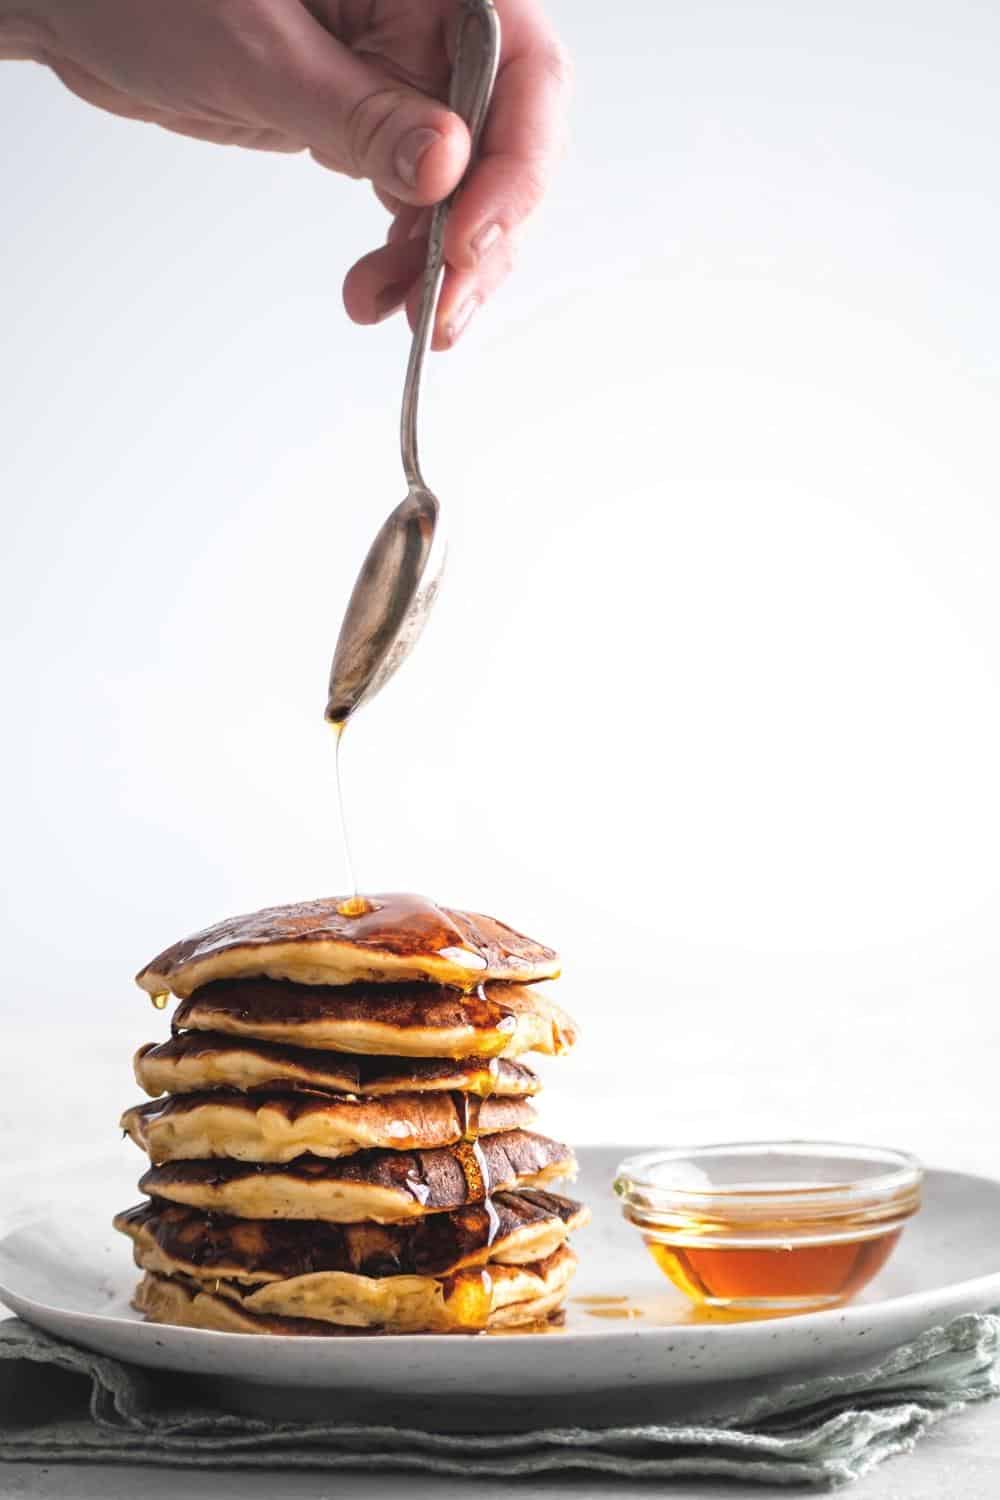 A hand holding a spoon drizzling syrup on top of a stack of seven pancakes on a white plate.